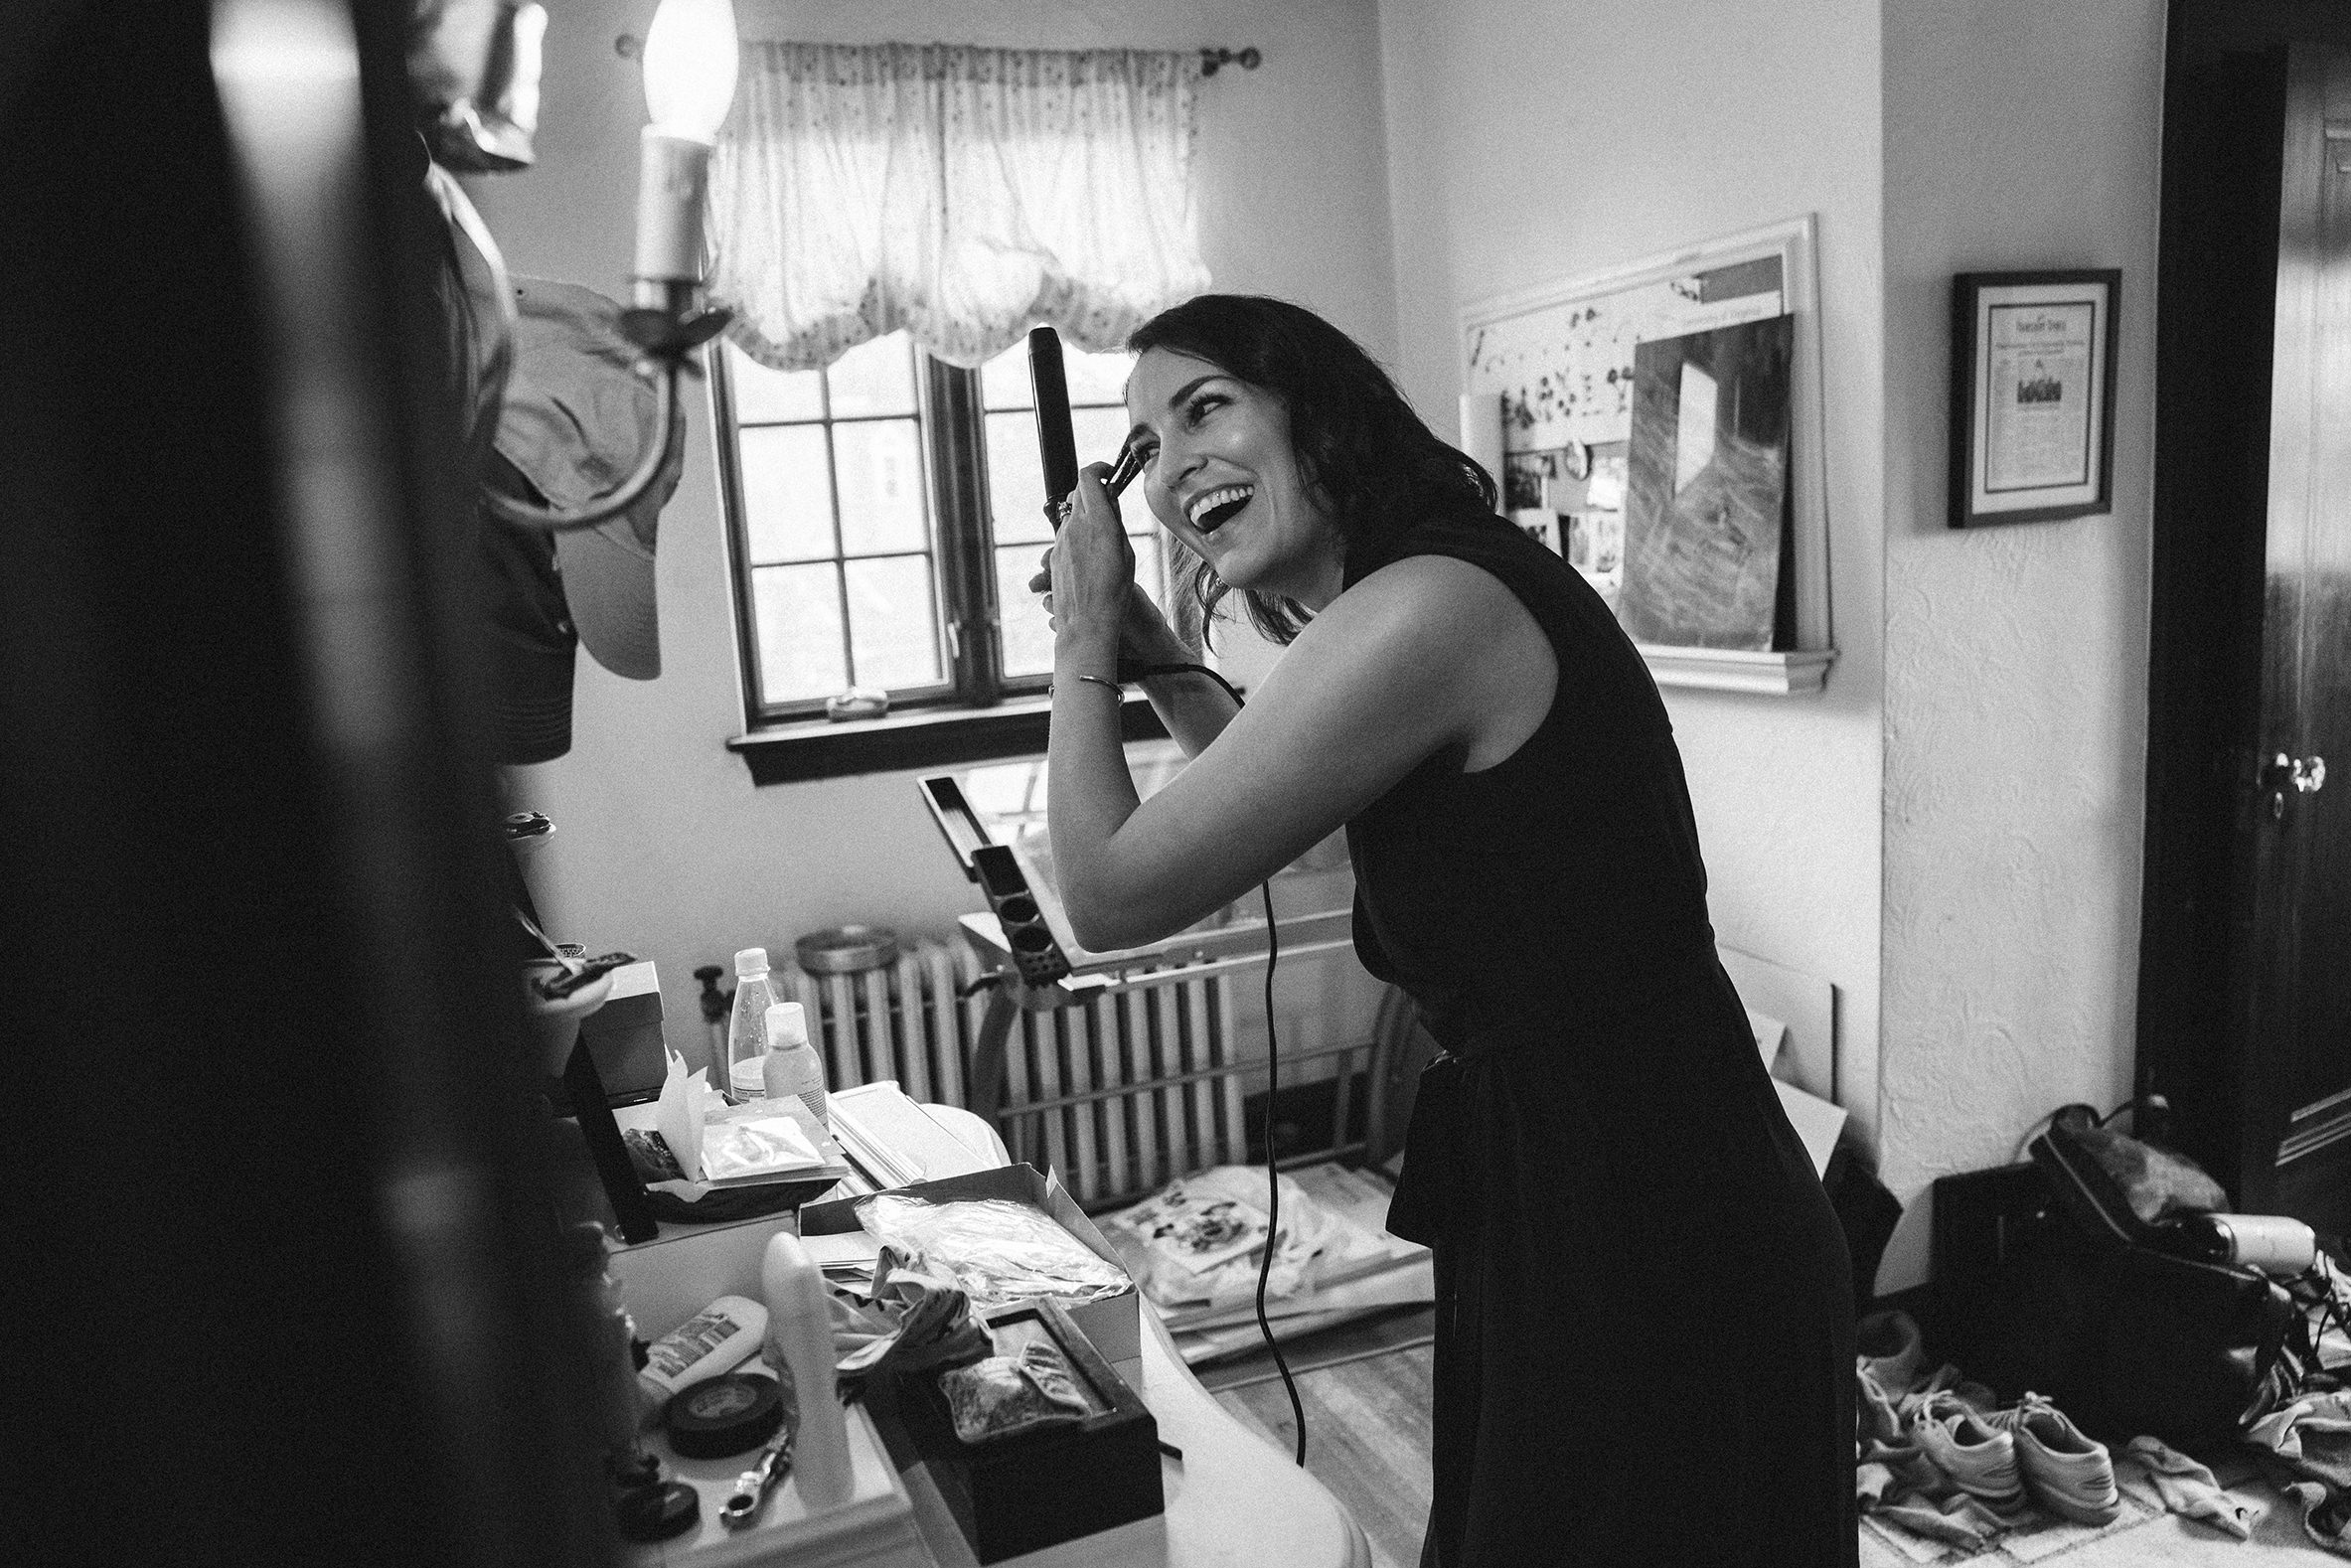 A documentary photograph featured in the best of wedding photography of 2019 showing a bridesmaid laughing and getting ready